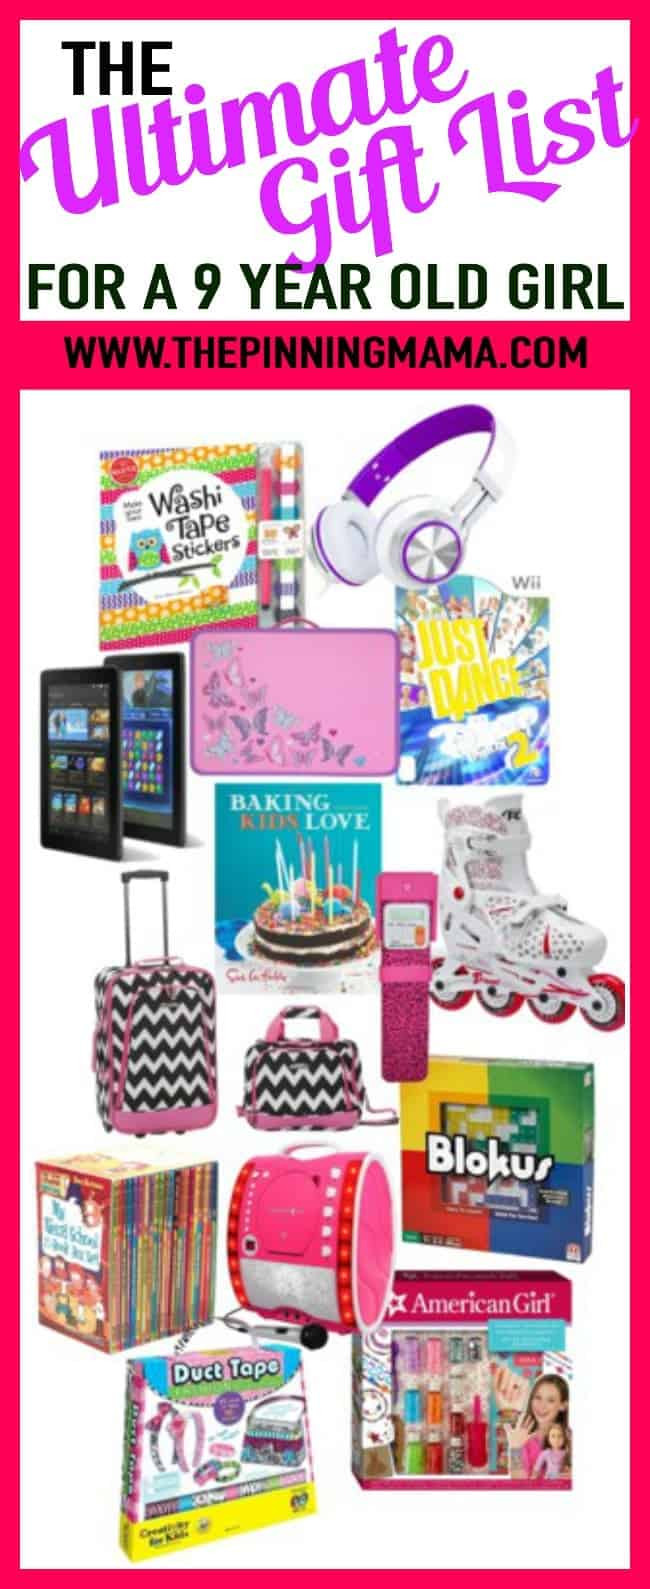 Birthday Party Ideas For 9 Year Old Daughter
 The Ultimate Gift List for a 9 Year Old Girl • The Pinning